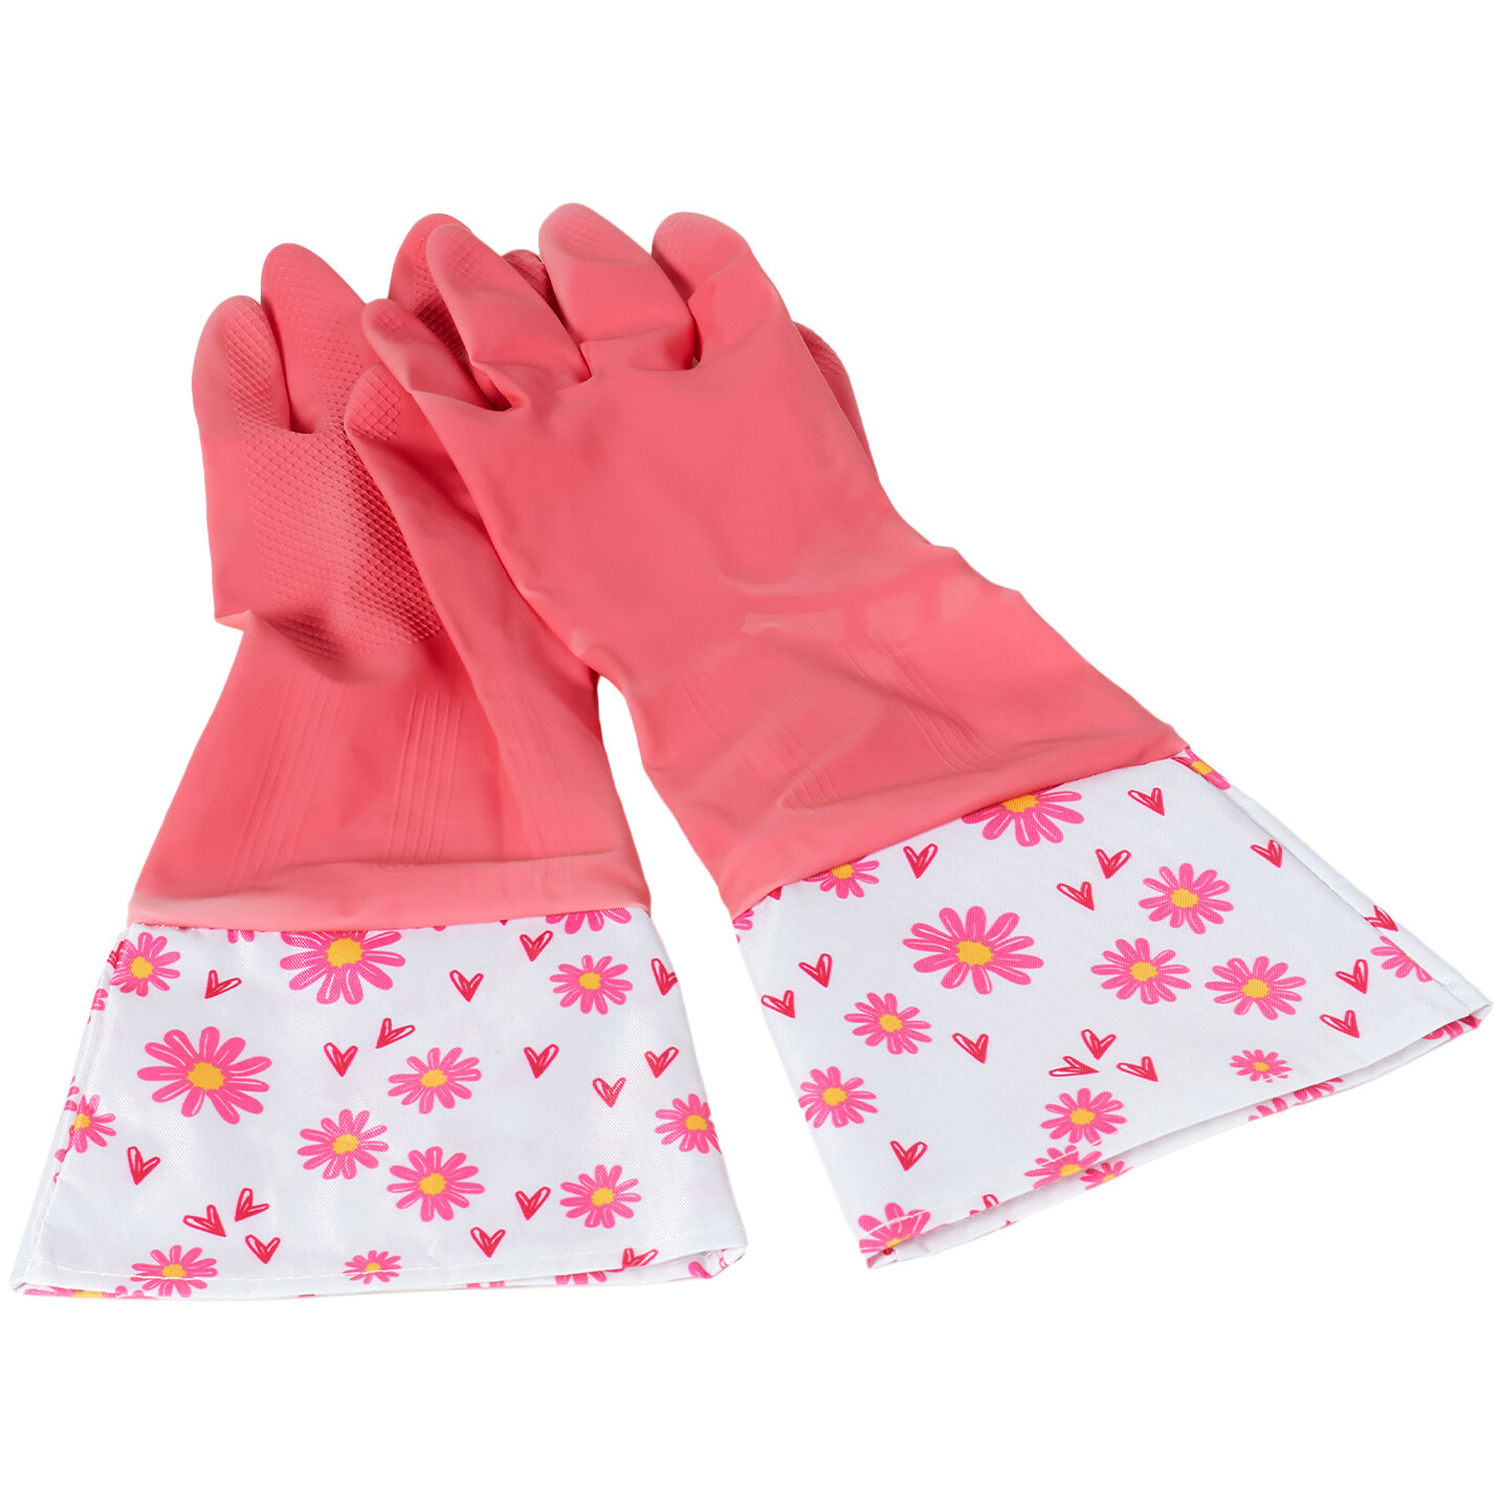 Daisy Pink Cleaning Washing Up Gloves Image 4